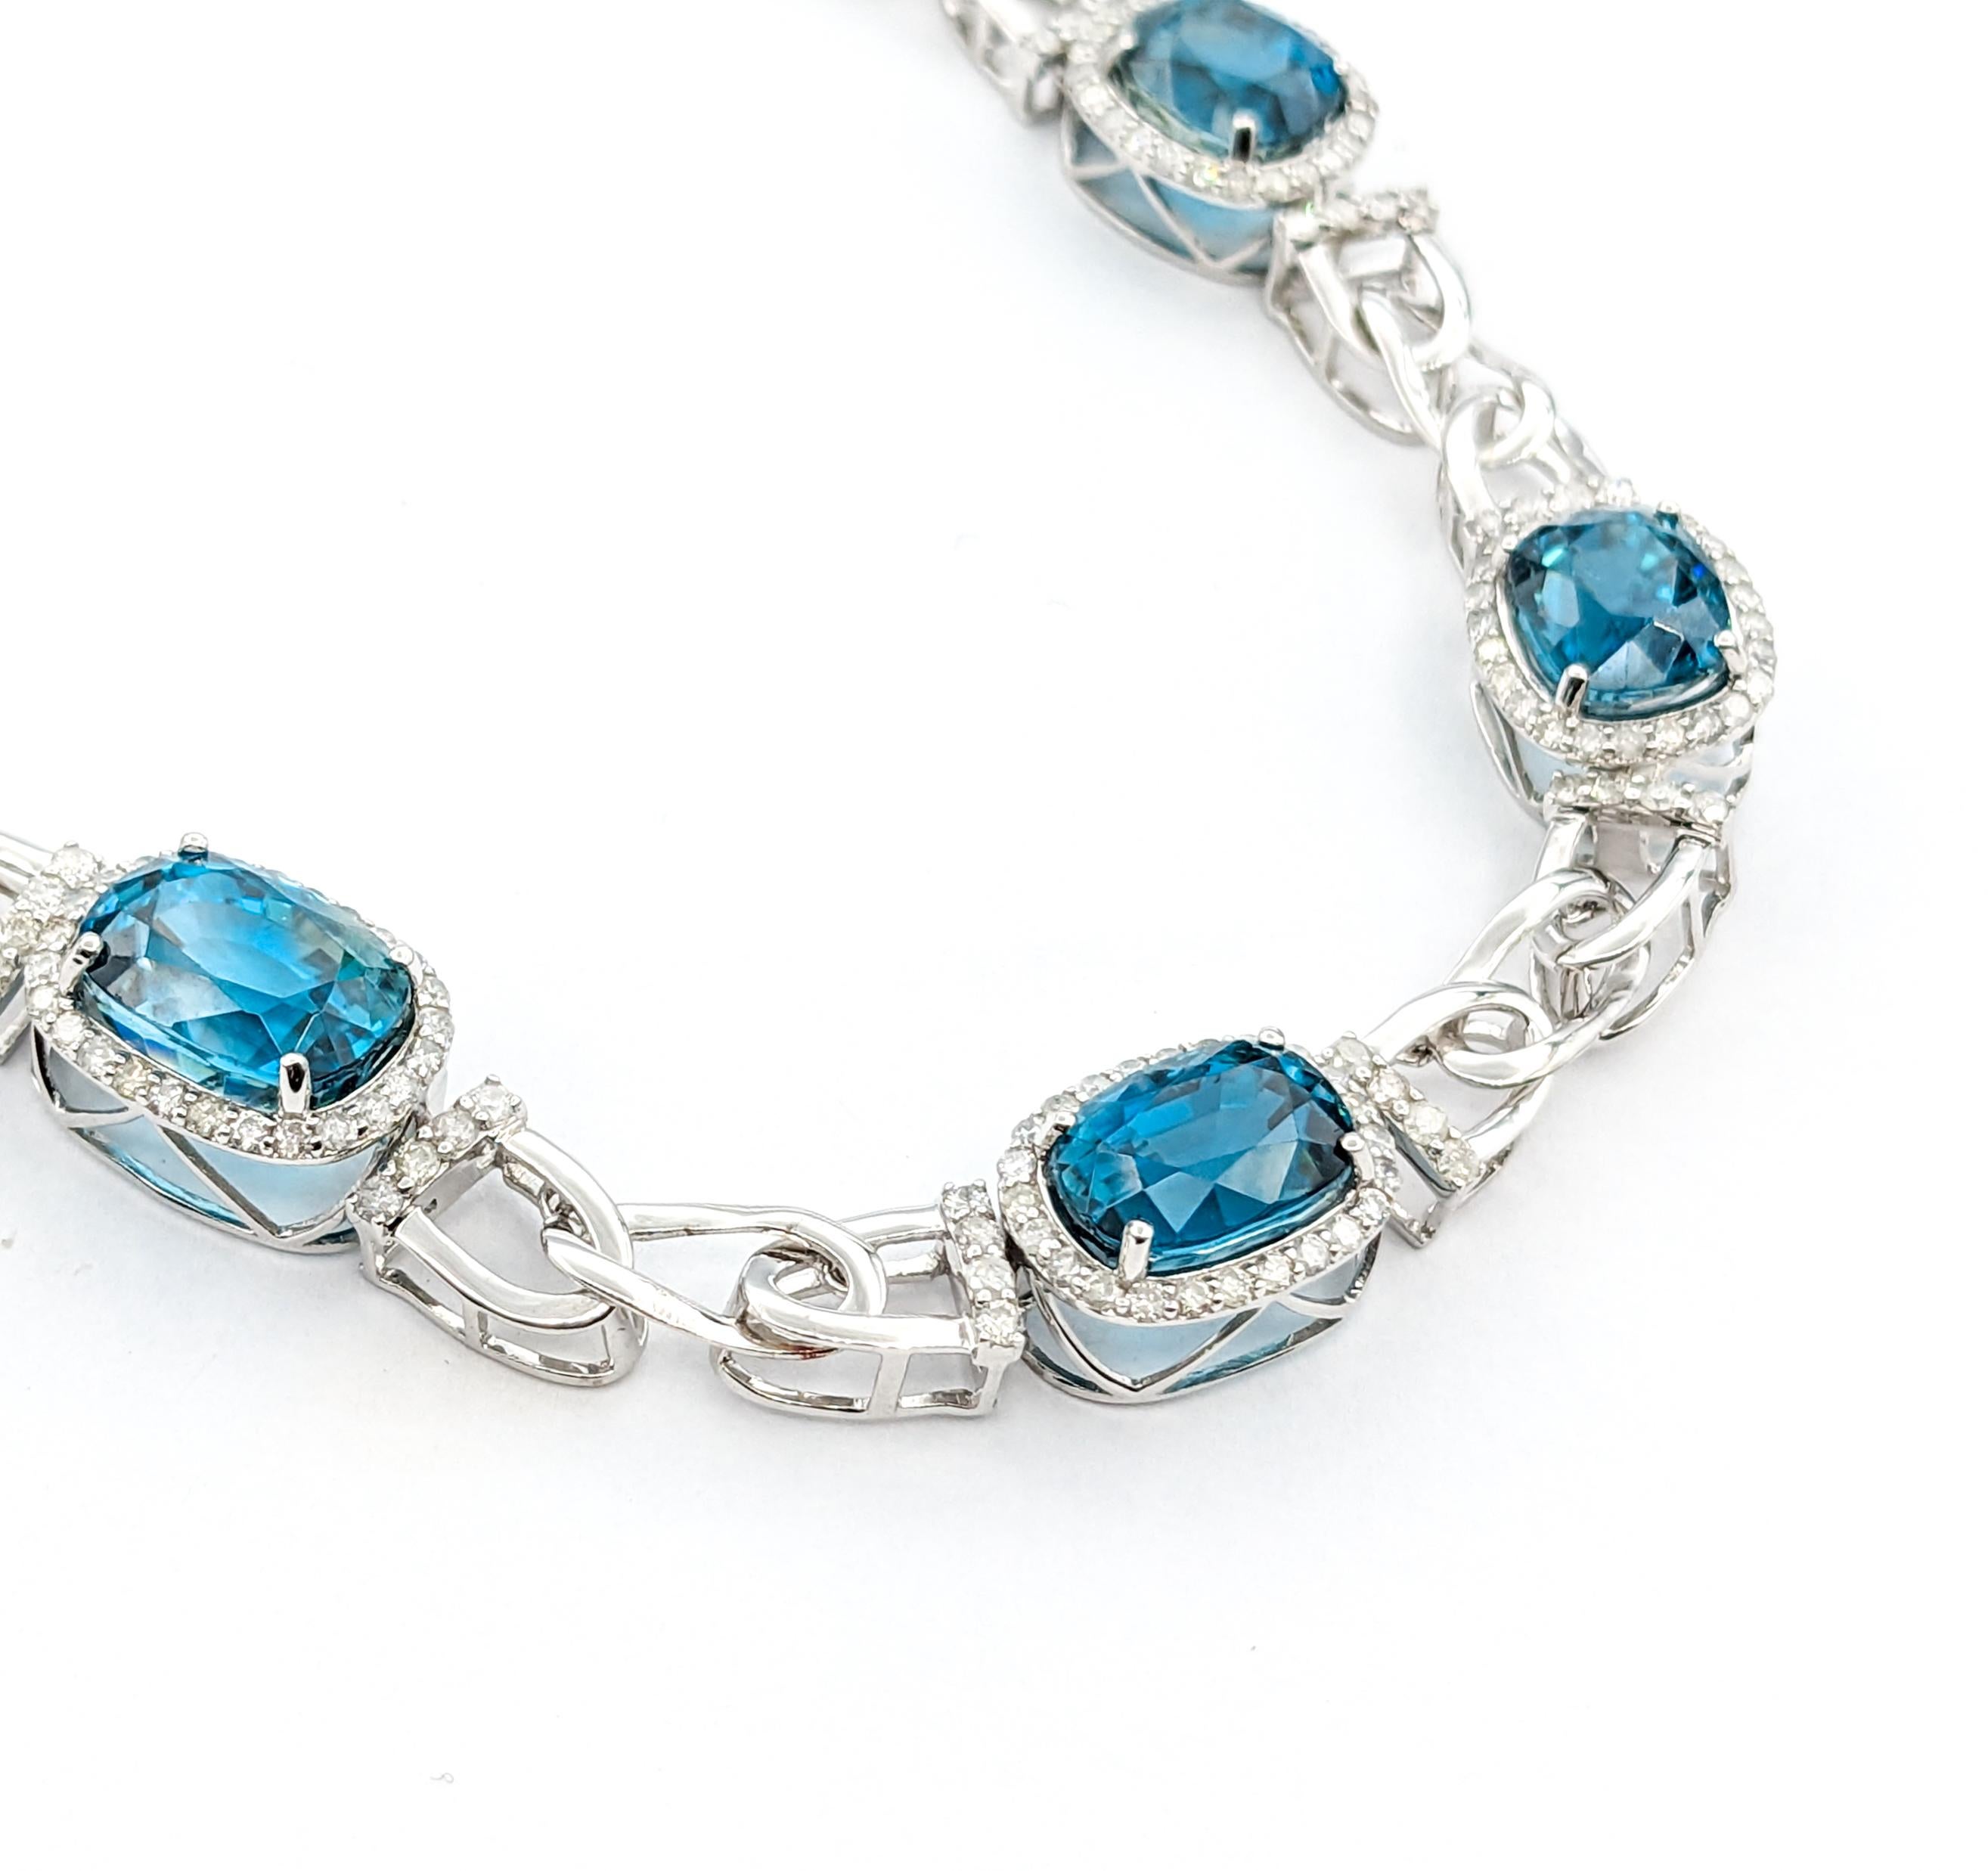 60.81ctw Blue Zircon & 4.53ctw Diamonds Necklace In White Gold

Introducing a stunning Natural Blue Zircon Necklace, exquisitely crafted in 14k White Gold. This luxurious necklace is a true embodiment of elegance and sophistication, featuring